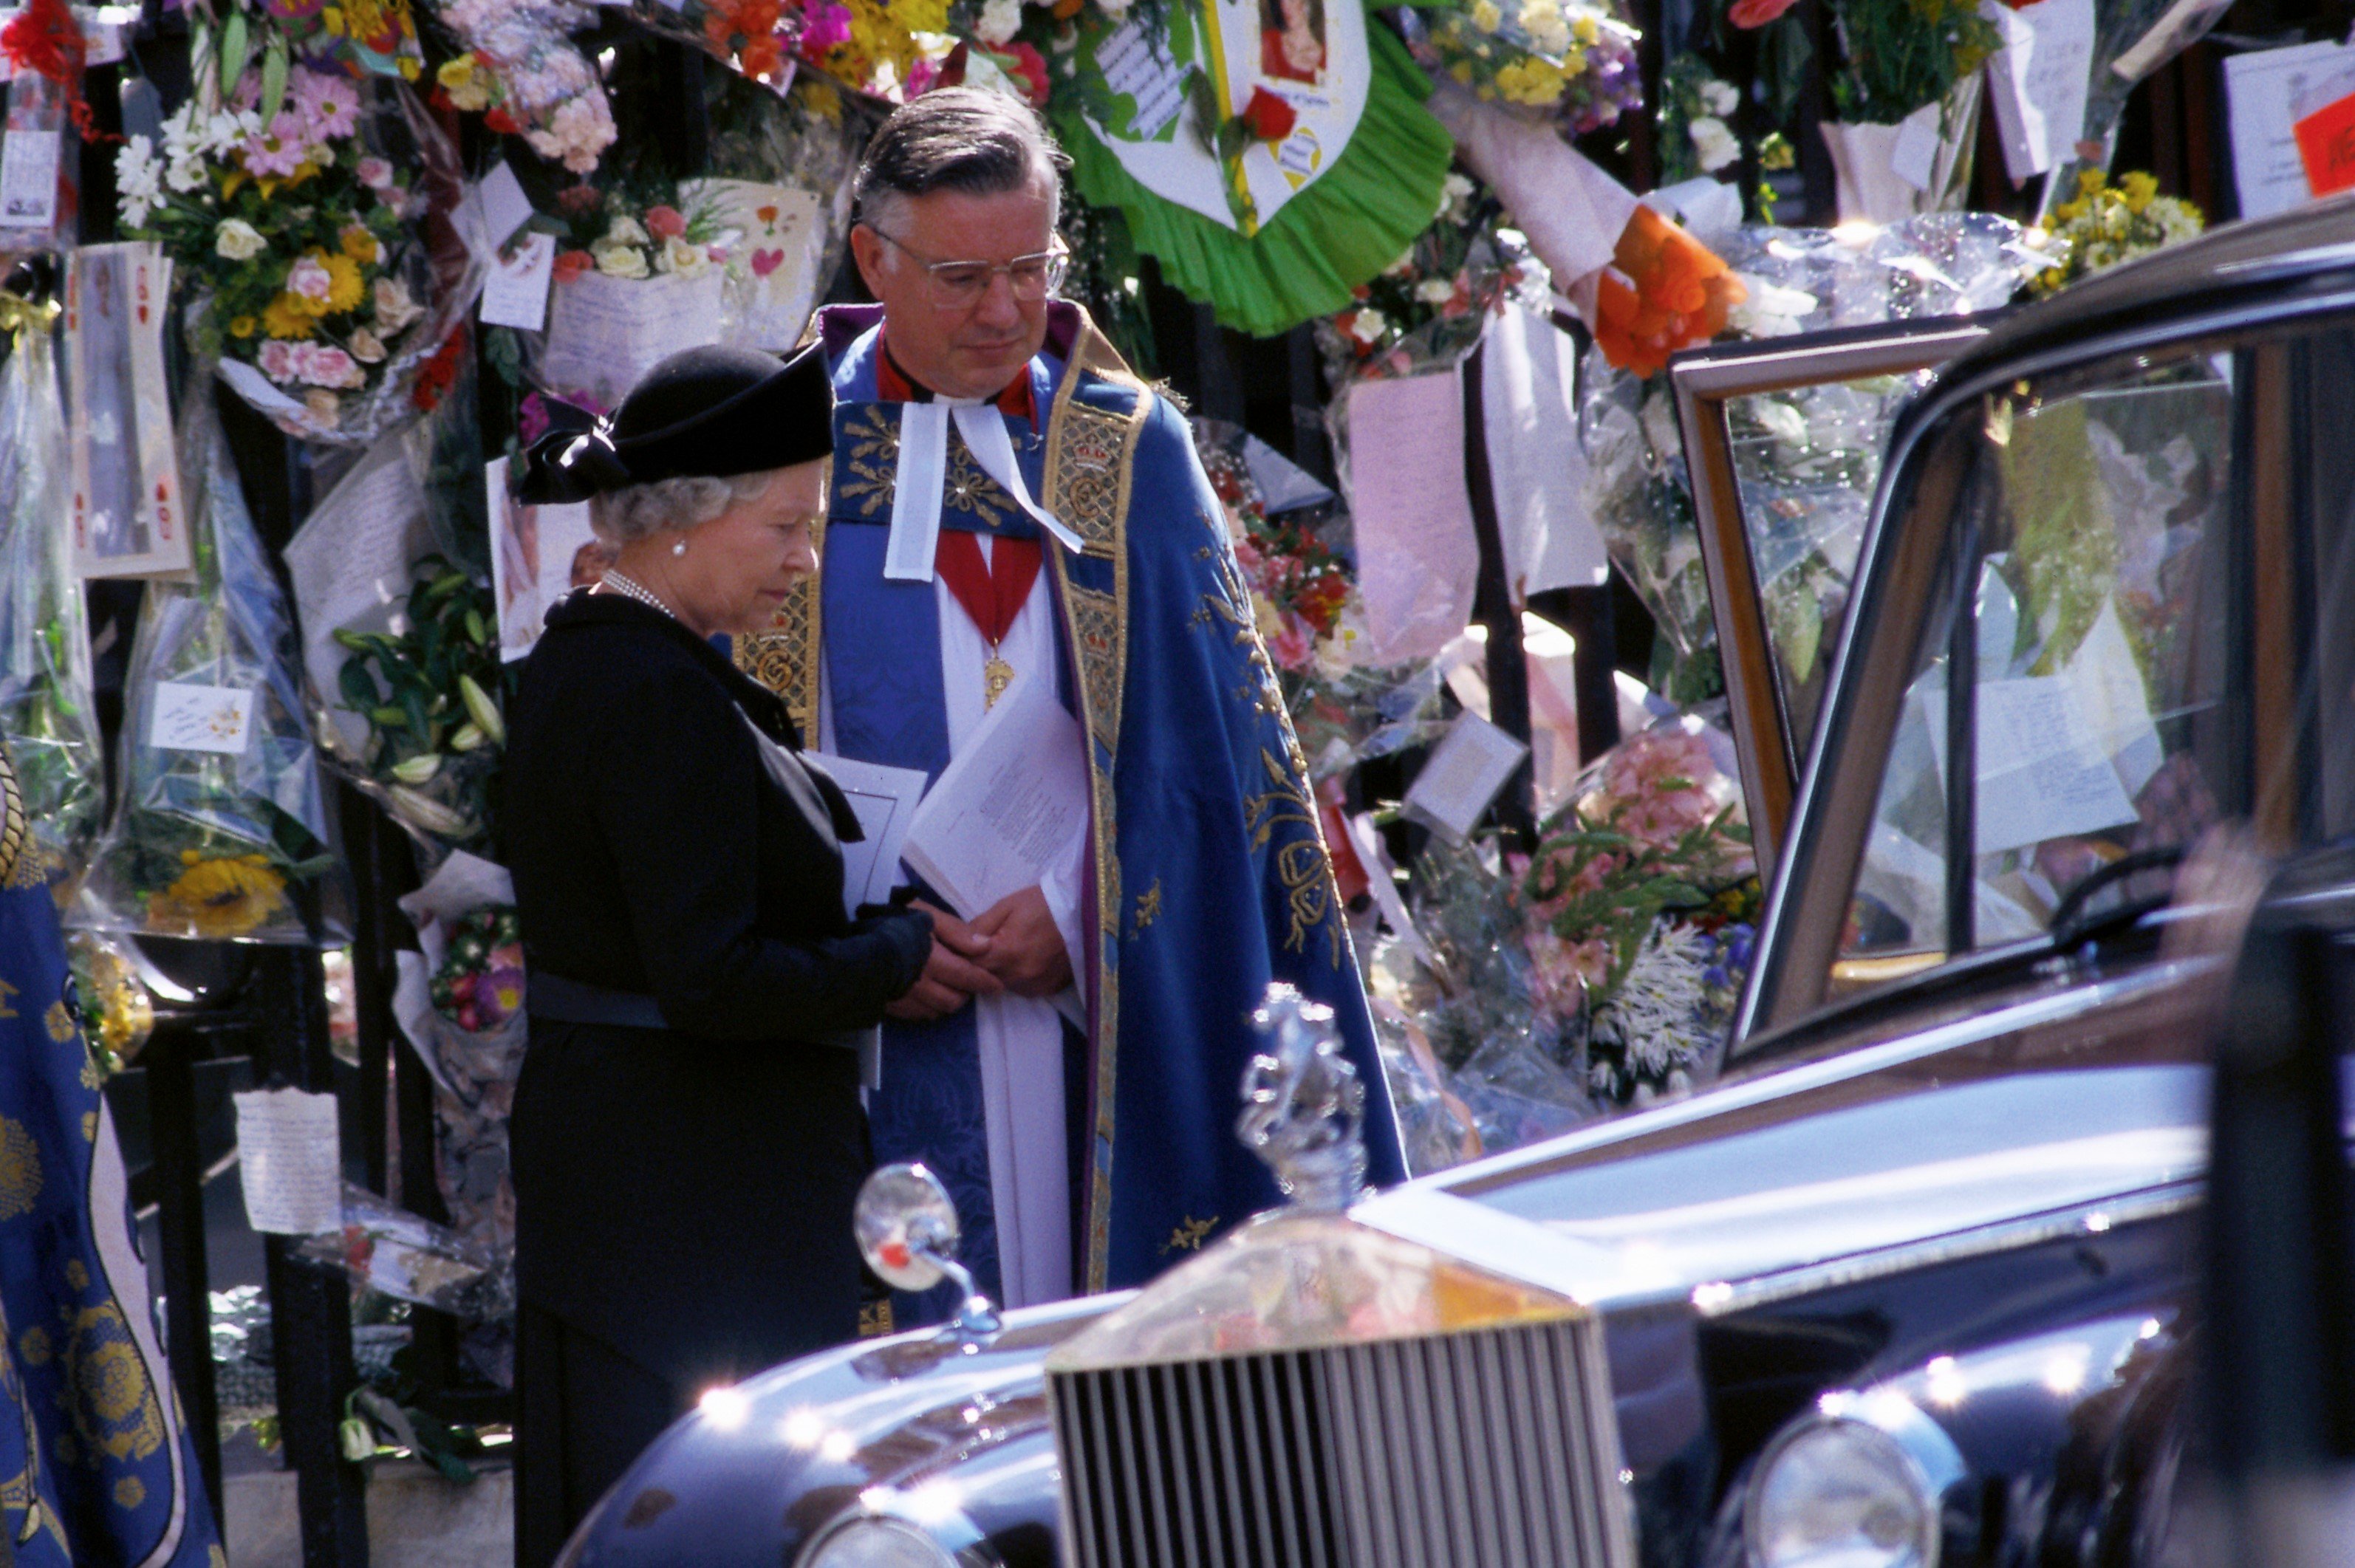 Queen Elizabeth stands with a priest at the funeral of Princess Diana